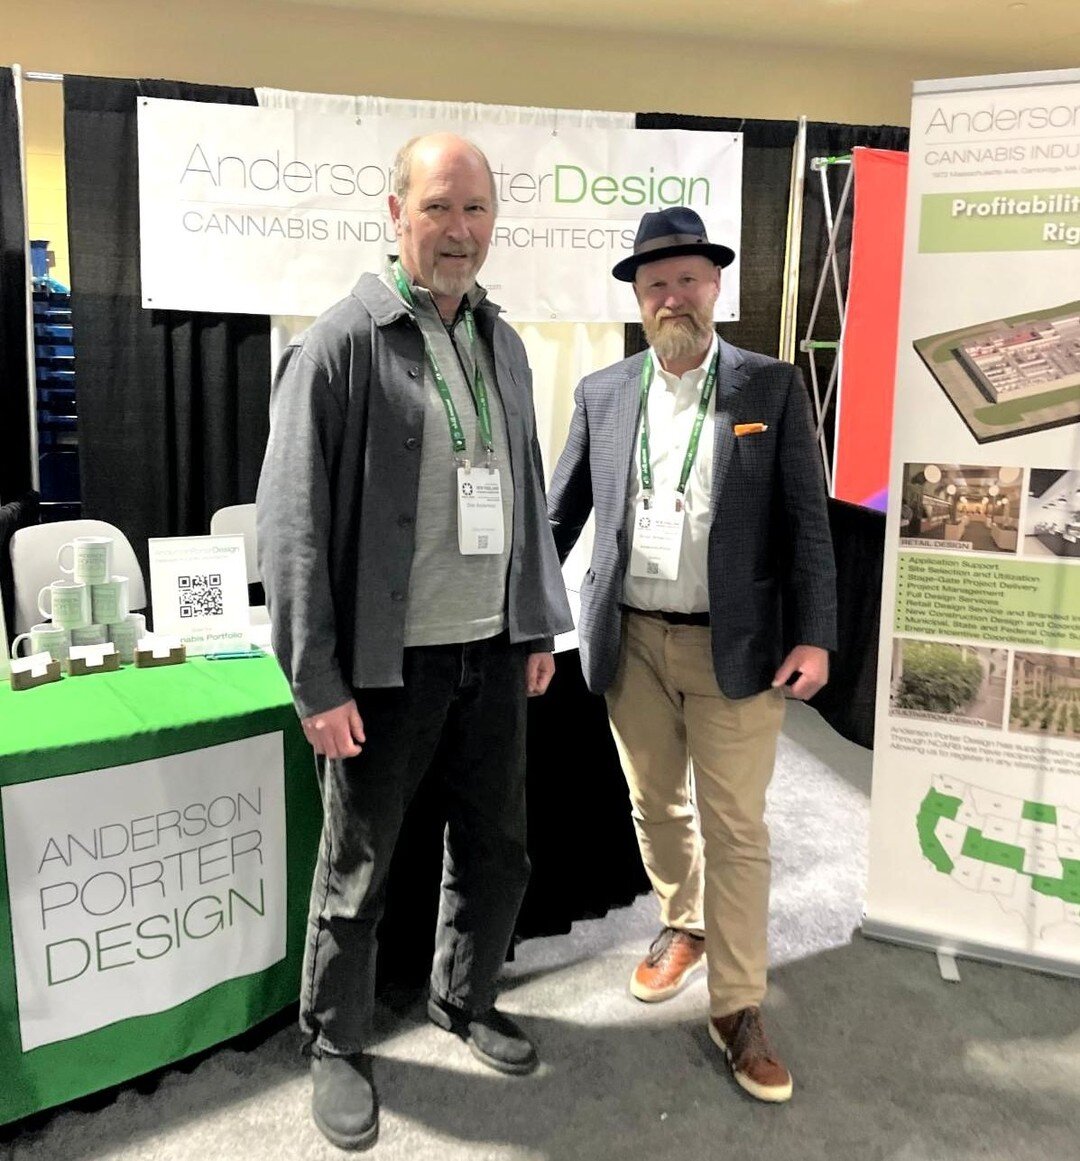 Another successful NECANN Boston! Our staff members had an excellent time connecting with new customers, past customers, project partners, and more! 

Chris Uhlig from Ceres Greenhouse made the trip out from CO to join Brian Anderson on the stage for